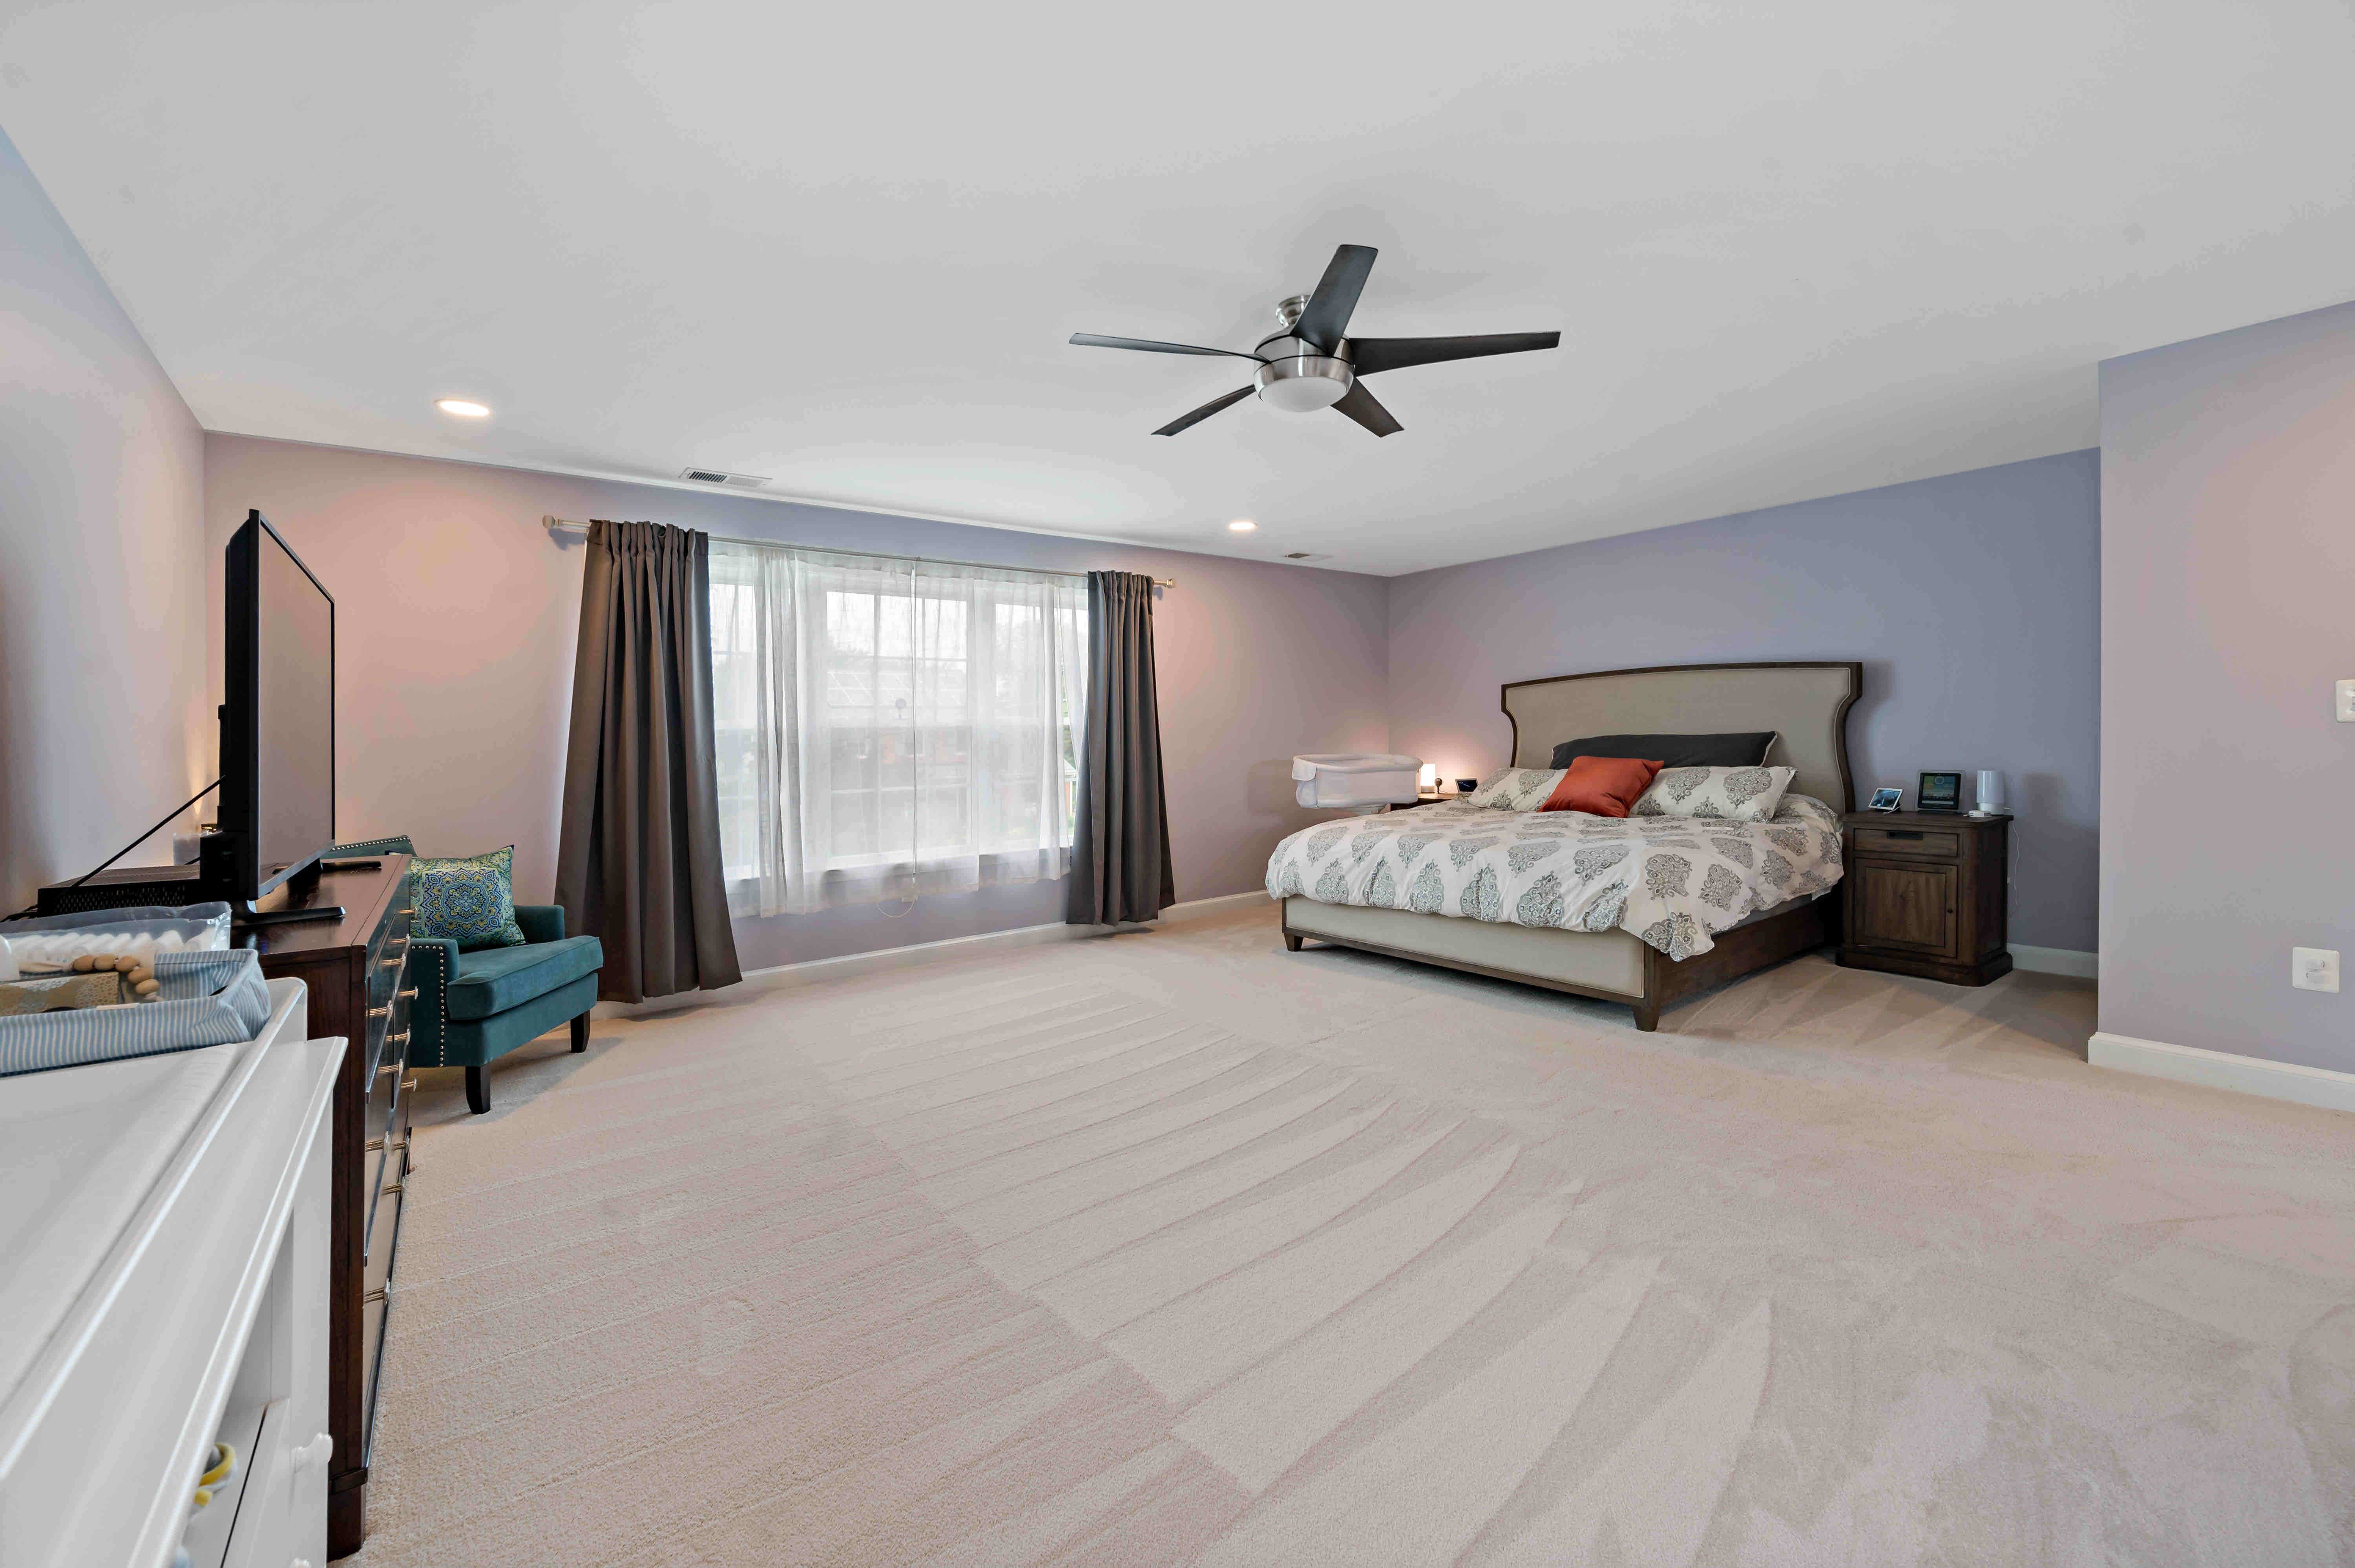 White ceiling and purple walls in bedroom